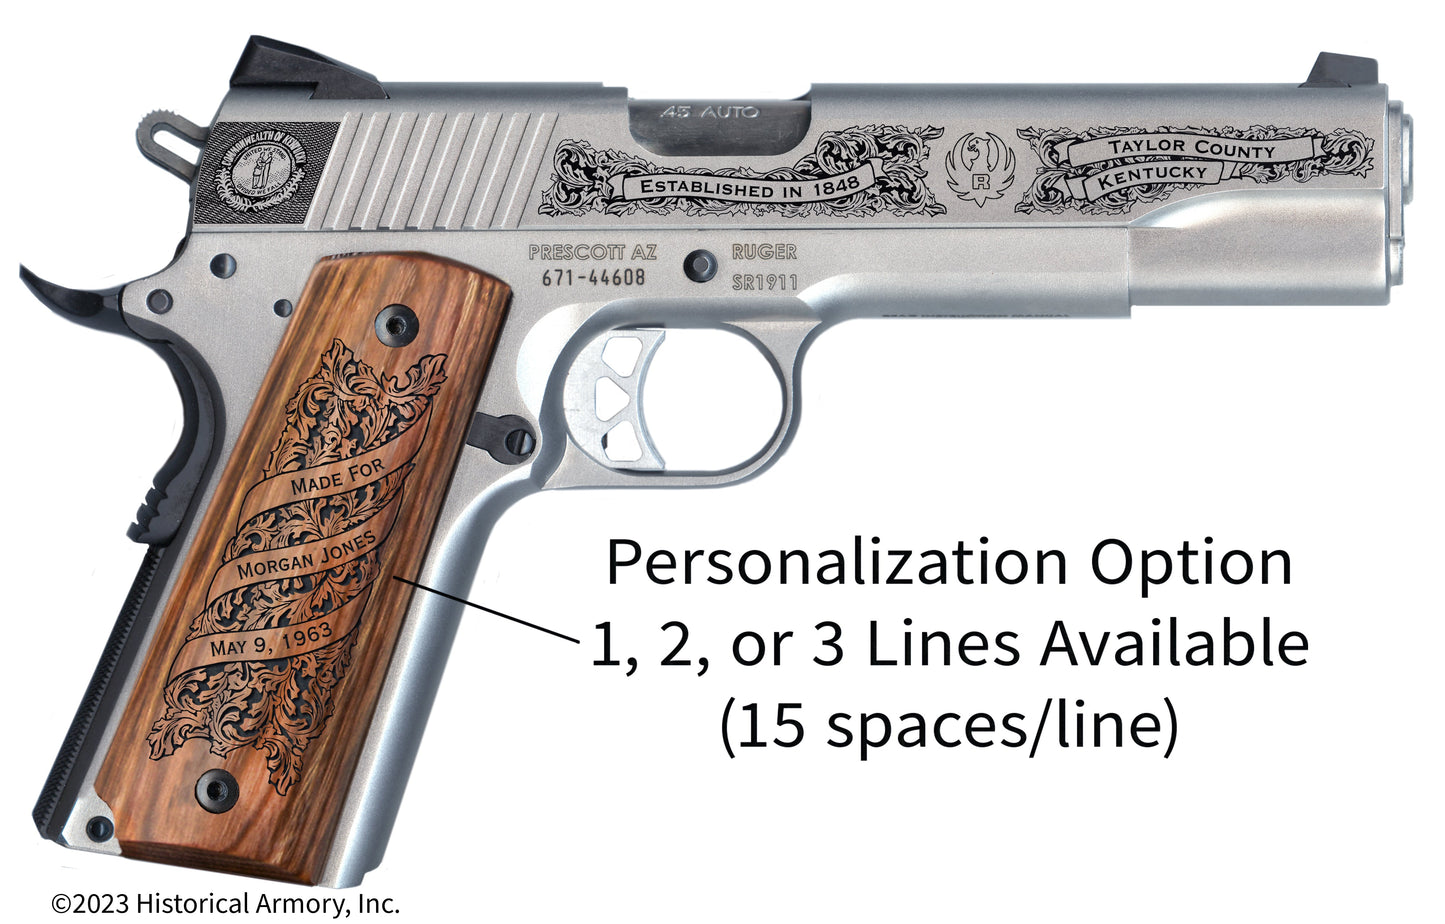 Taylor County Kentucky Personalized Engraved .45 Auto Ruger 1911